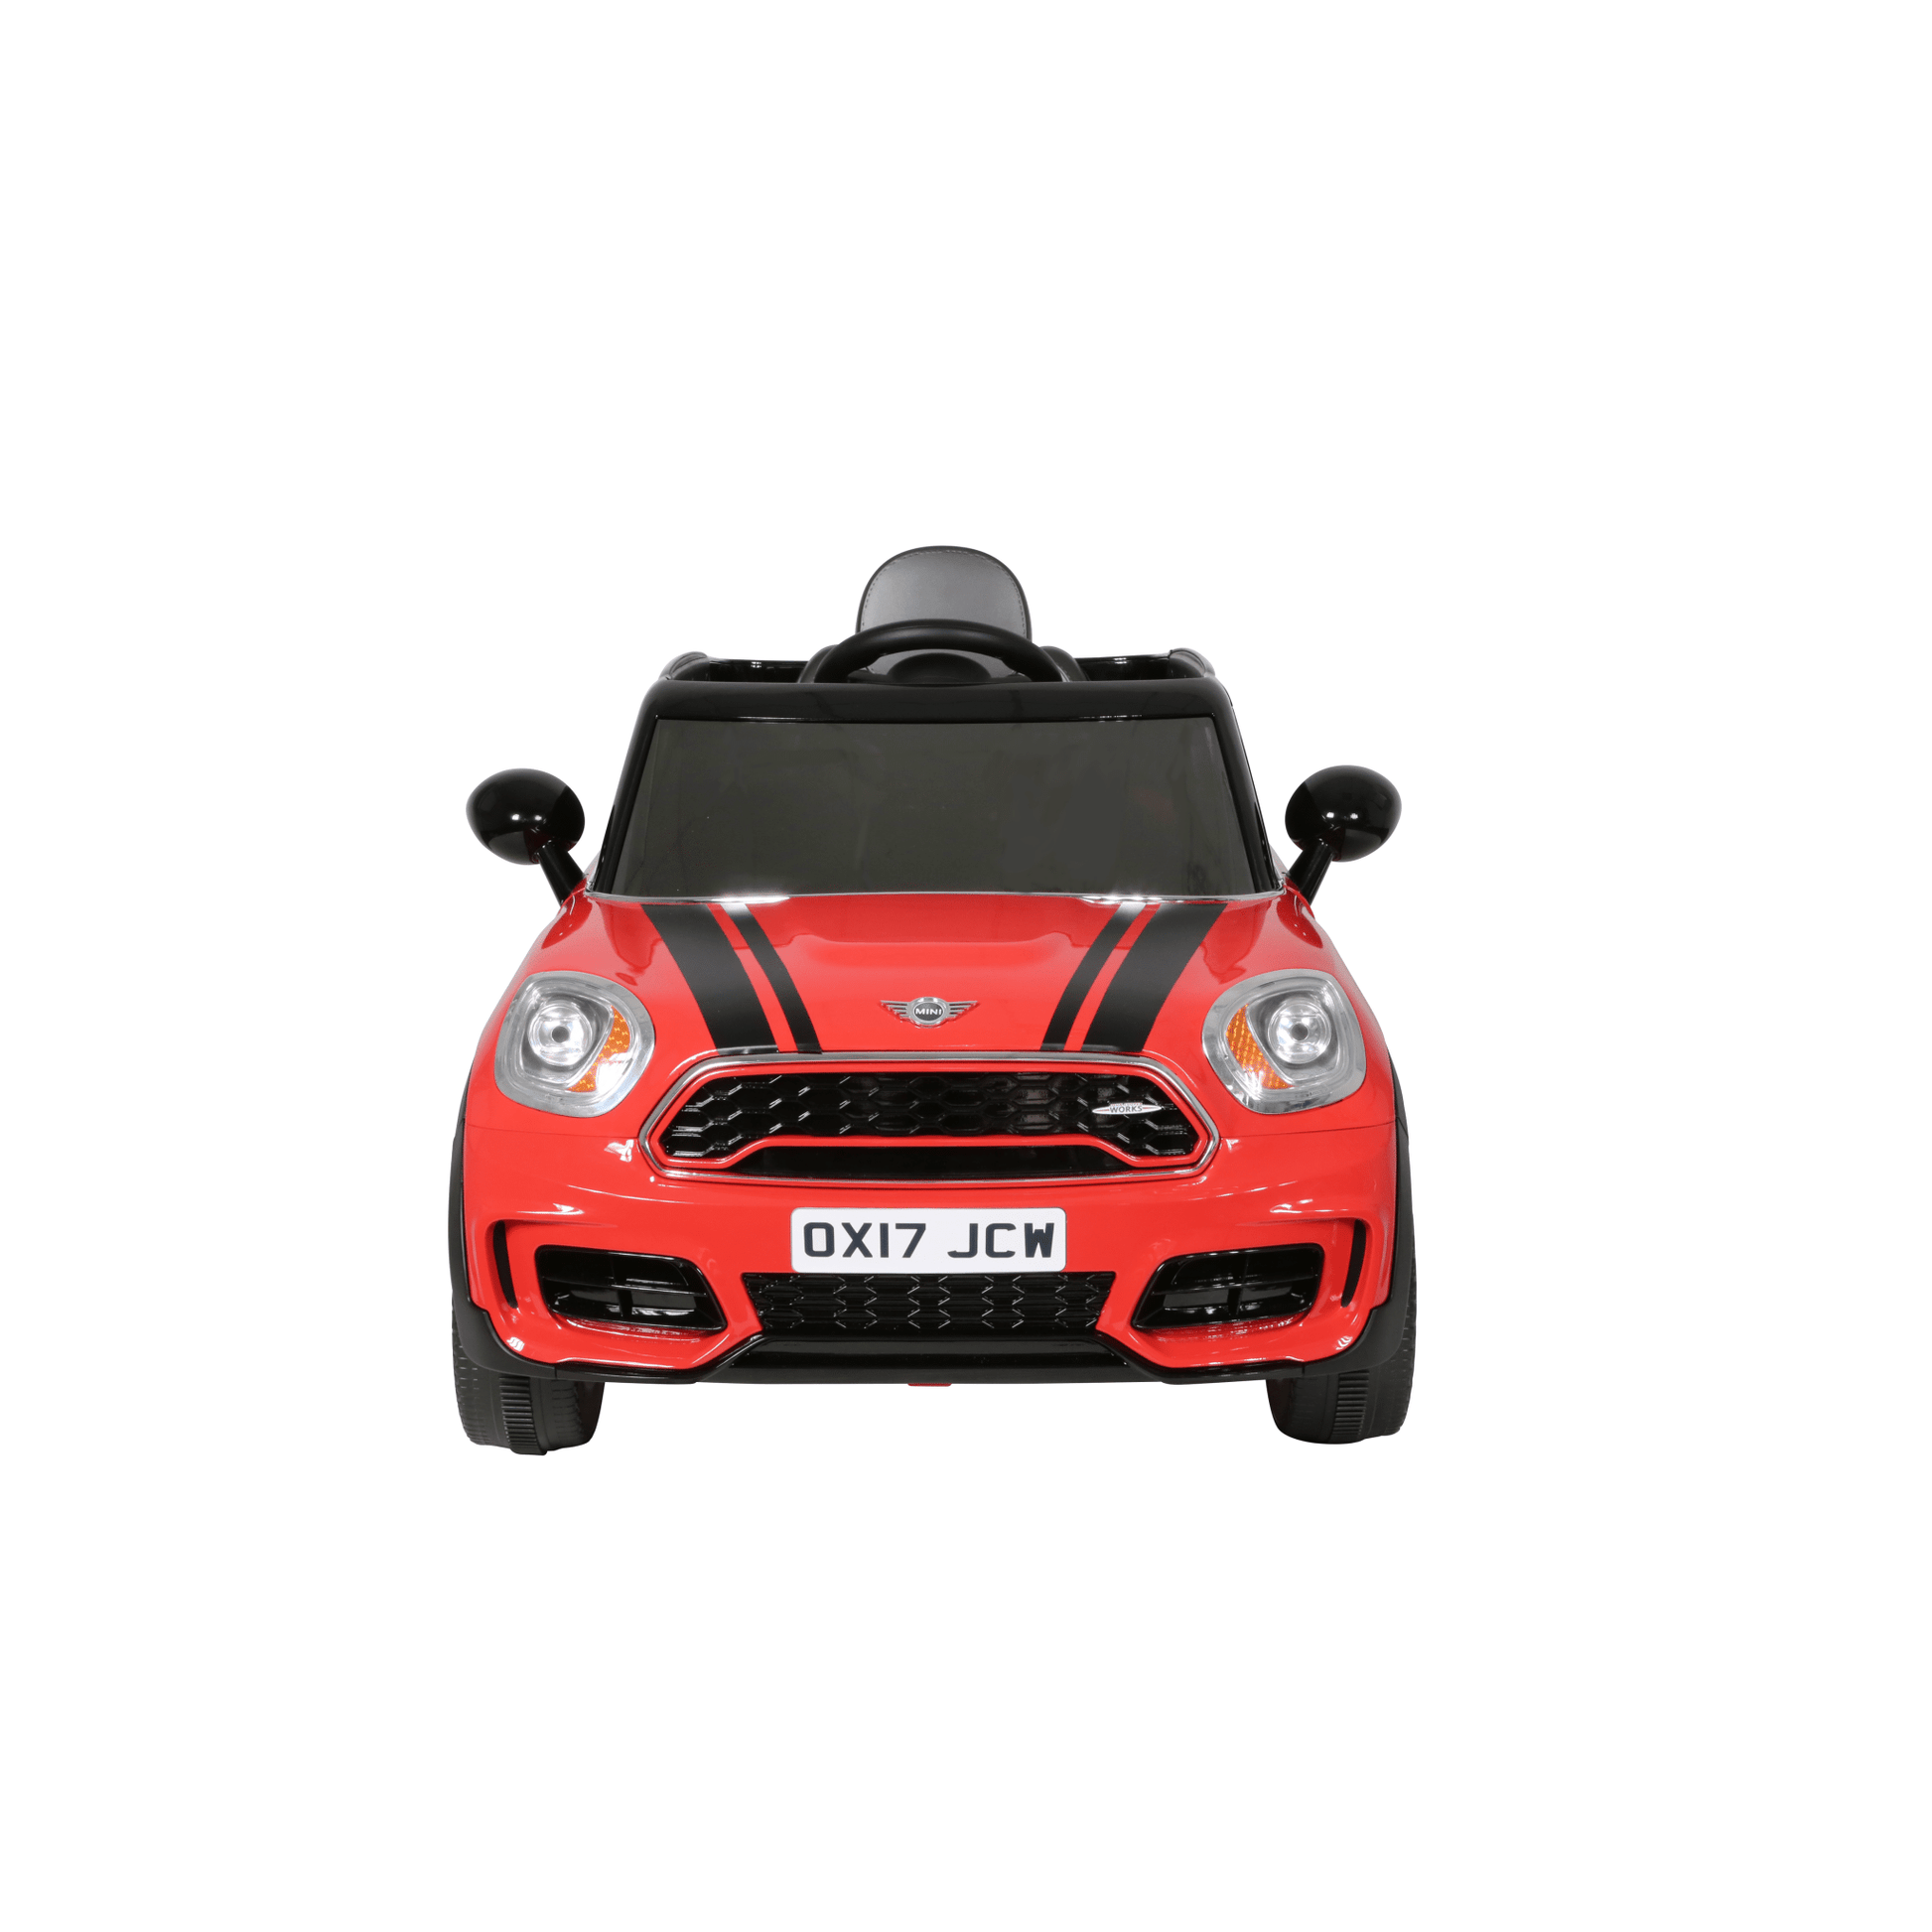 Mini Countryman 6 Volt Car with Remote Control - Red - The Online Toy Shop - Powered Car - 7